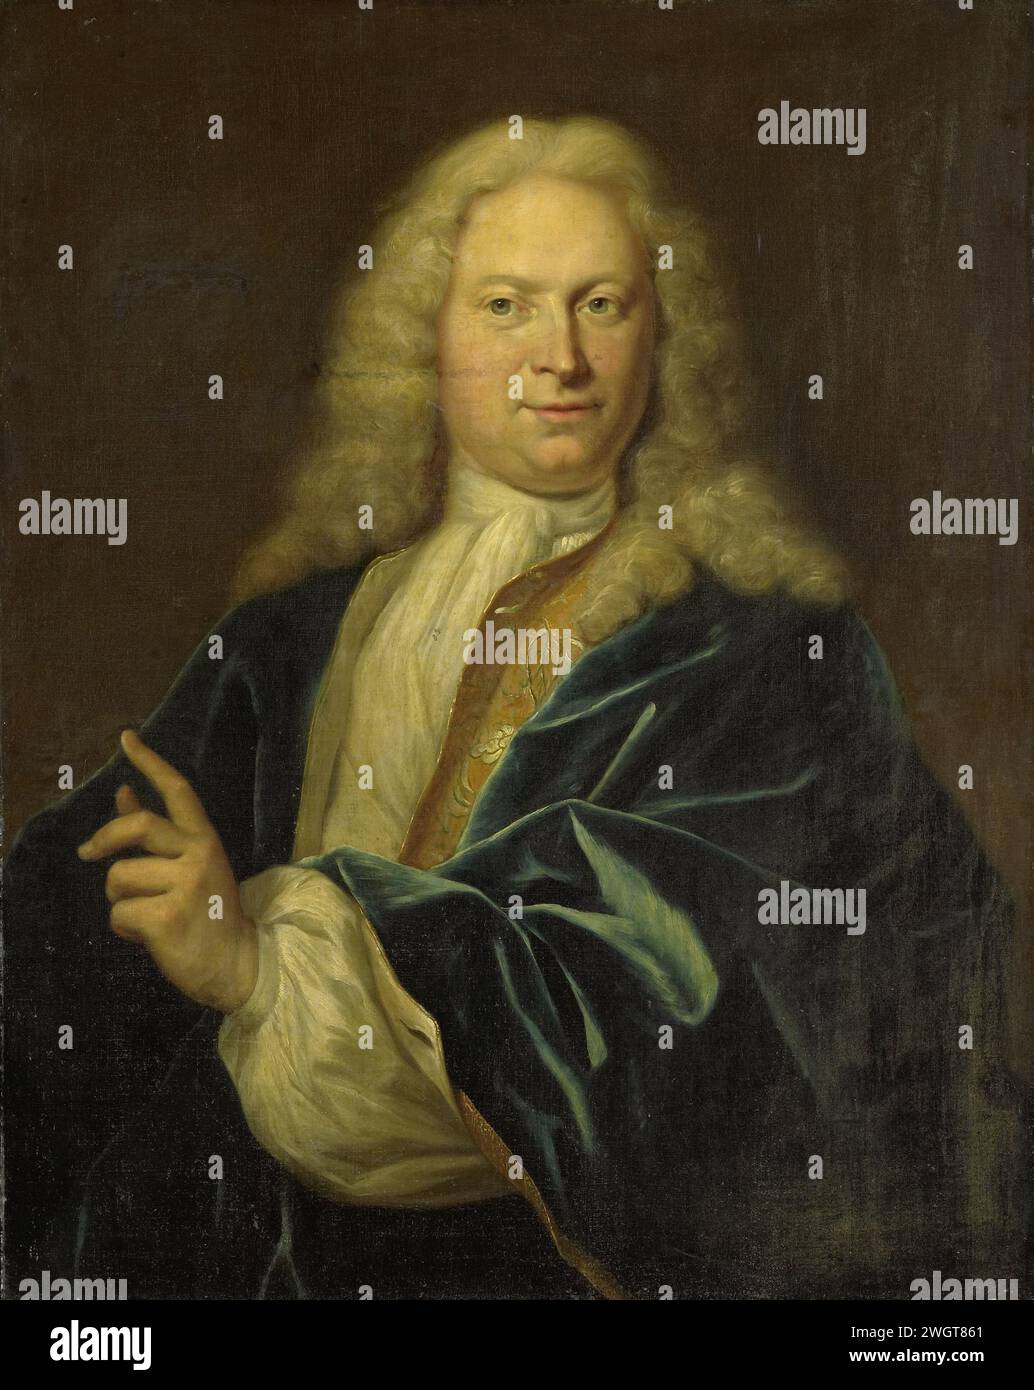 Portrait of Jan Hendrik van Heemskerck, Count of the Holy Roman Empire, Lord of Achttienhoven, Den Bosch and Eyndschoten, Captain of the Citizenry or Amsterdam (Johan Hendrik Graaf van Heemskerk), Jan Maurits Quinkhard, 1710 - 1730 painting Portrait of Jan Henry van Heemskerck (1689-1730), count of the Holy Roman Empire, Lord of eighteenhoven, Den Bosch and Eyndschoten. Captain Der Burgerij in Amsterdam. Halved, with lifted and gesting left hand.  canvas. oil paint (paint)  historical persons Stock Photo